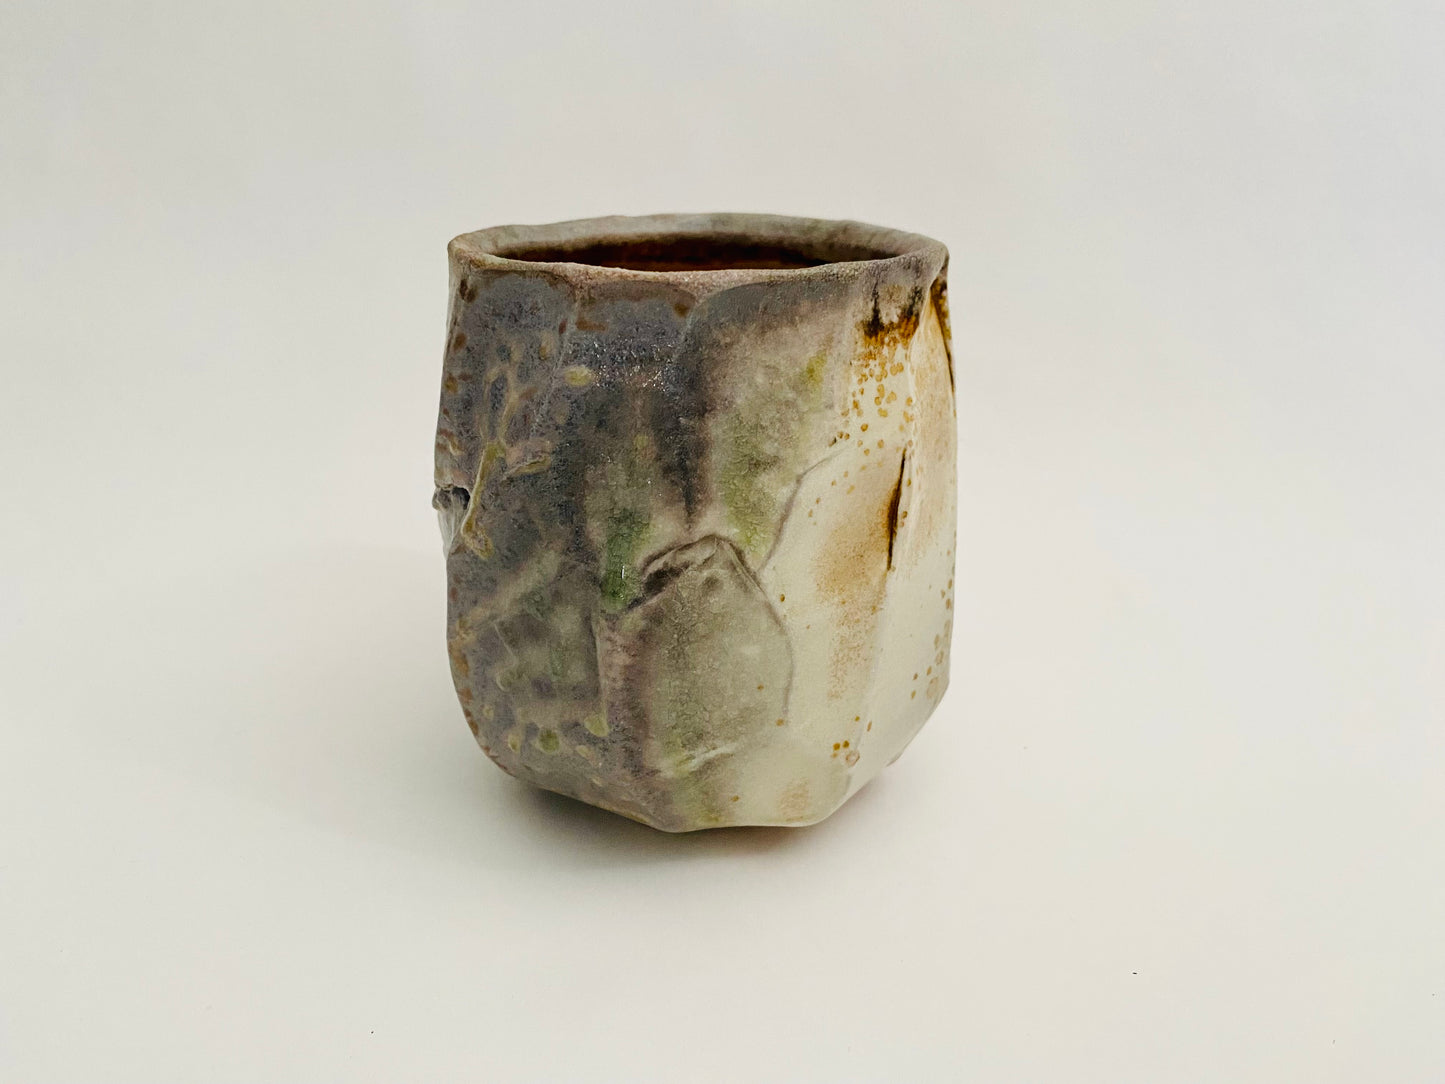 Wood fired porcelain faceted cup.